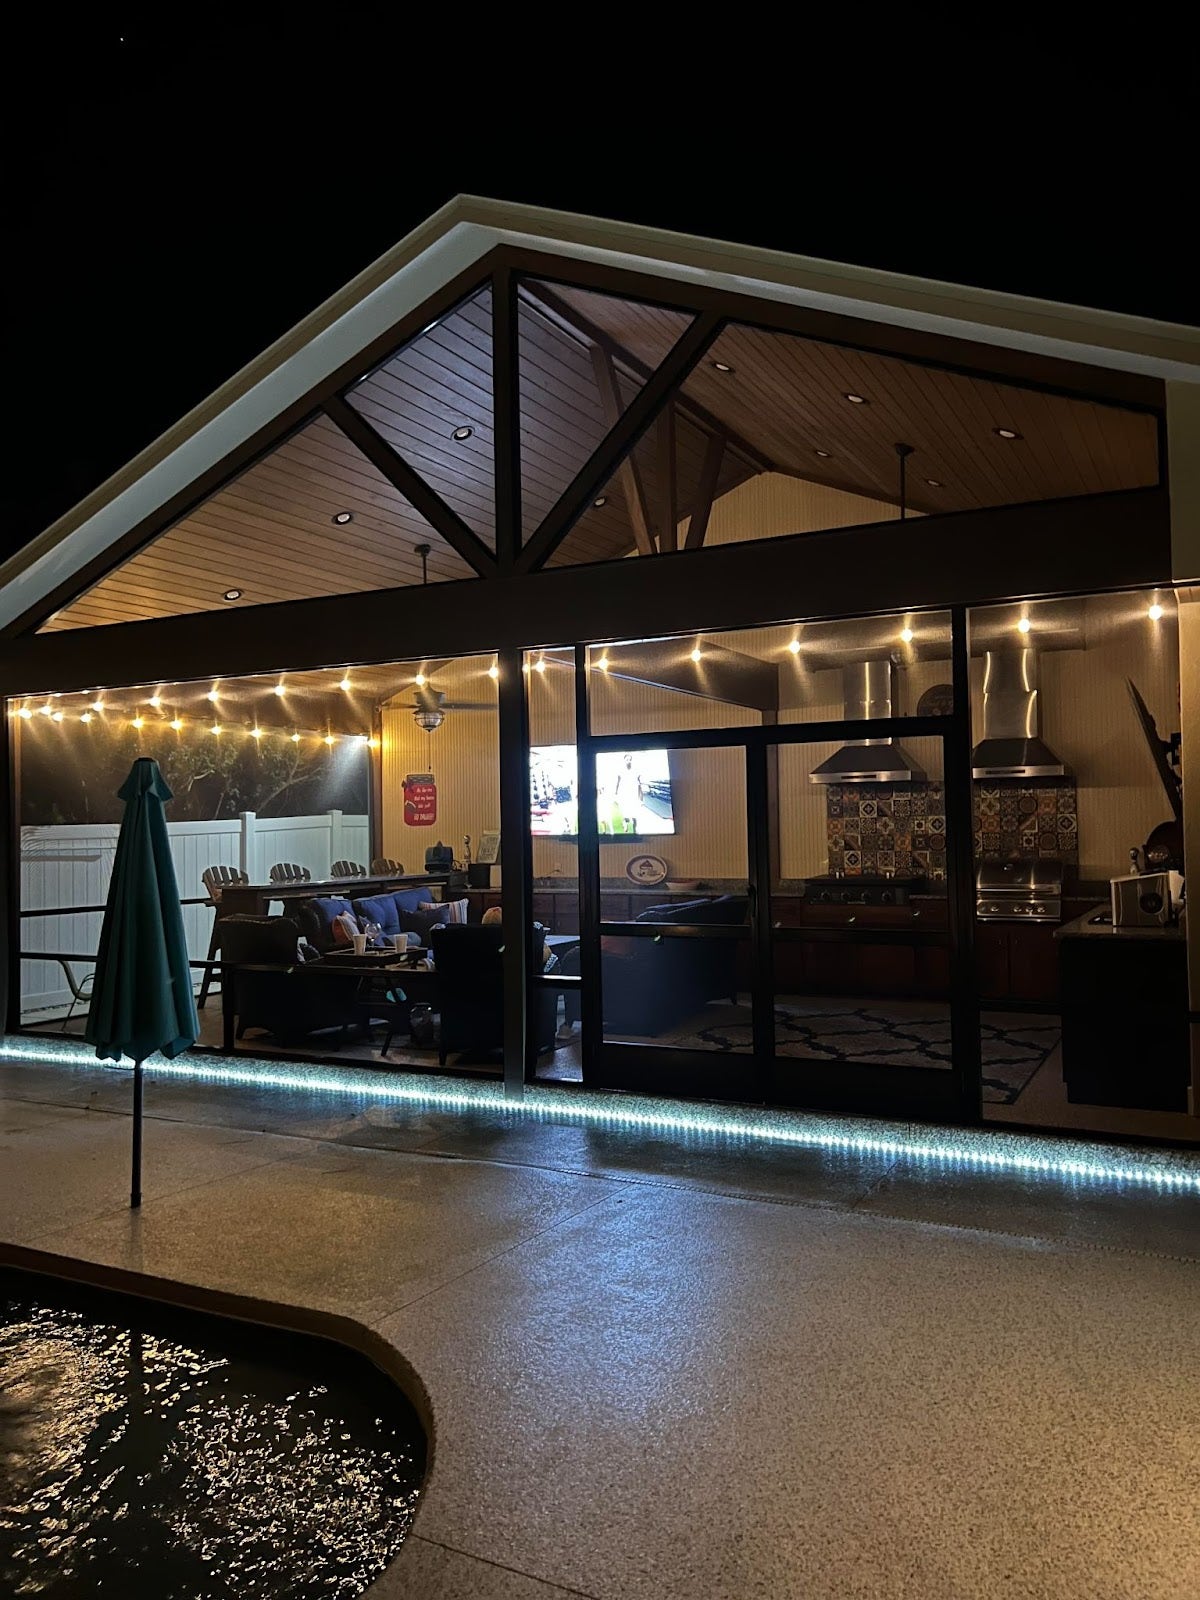 Evening atmosphere in a sheltered outdoor entertainment area with LED lighting, a poolside view, and an open-concept kitchen visible in the background. - Proline Range Hoods - prolinerangehoods.com 